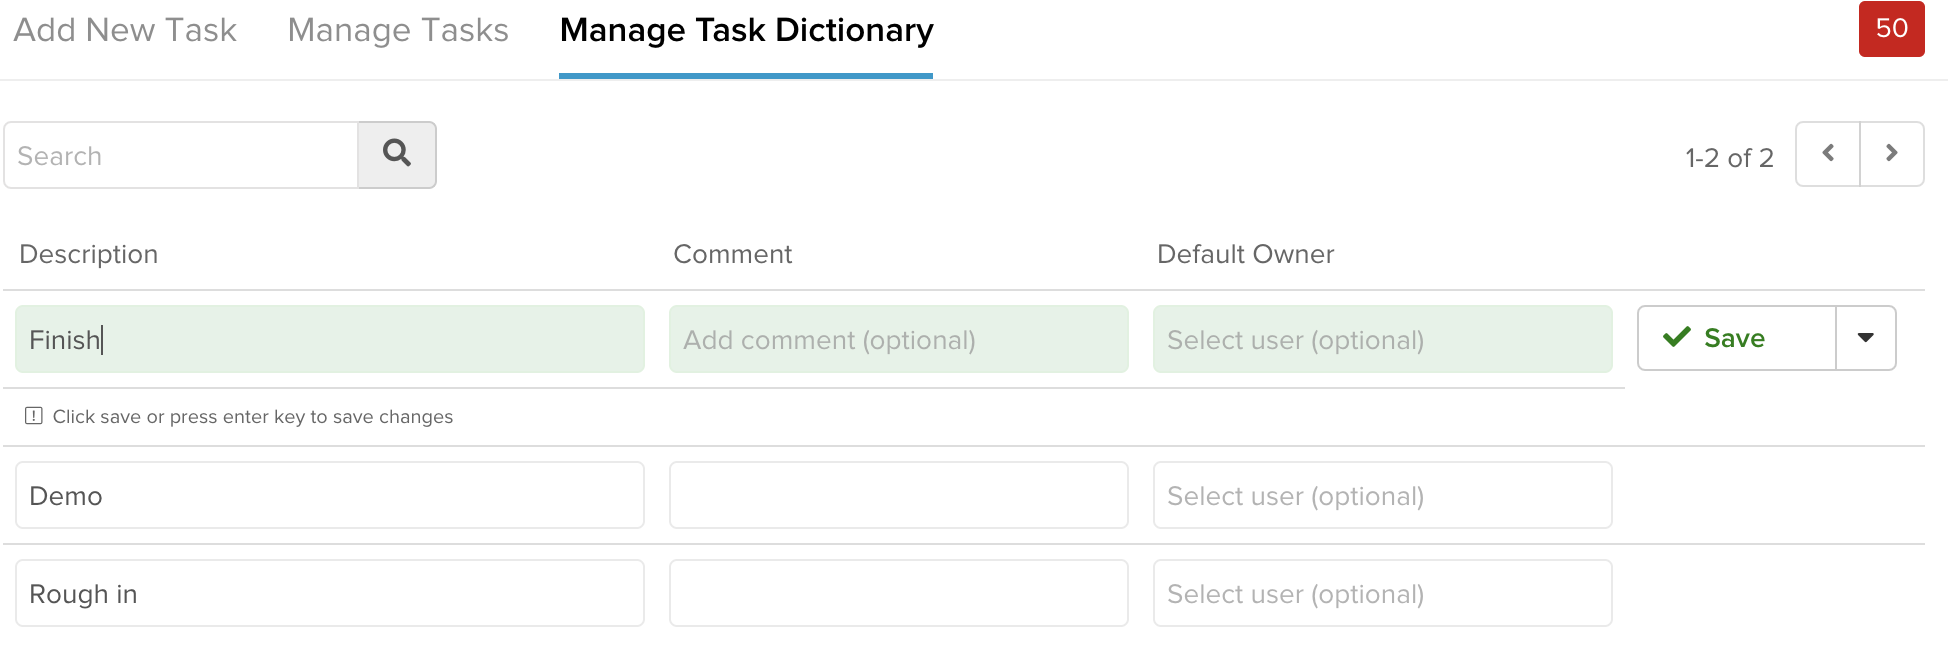 2019-knowify-tasks-dictionary-manage.png